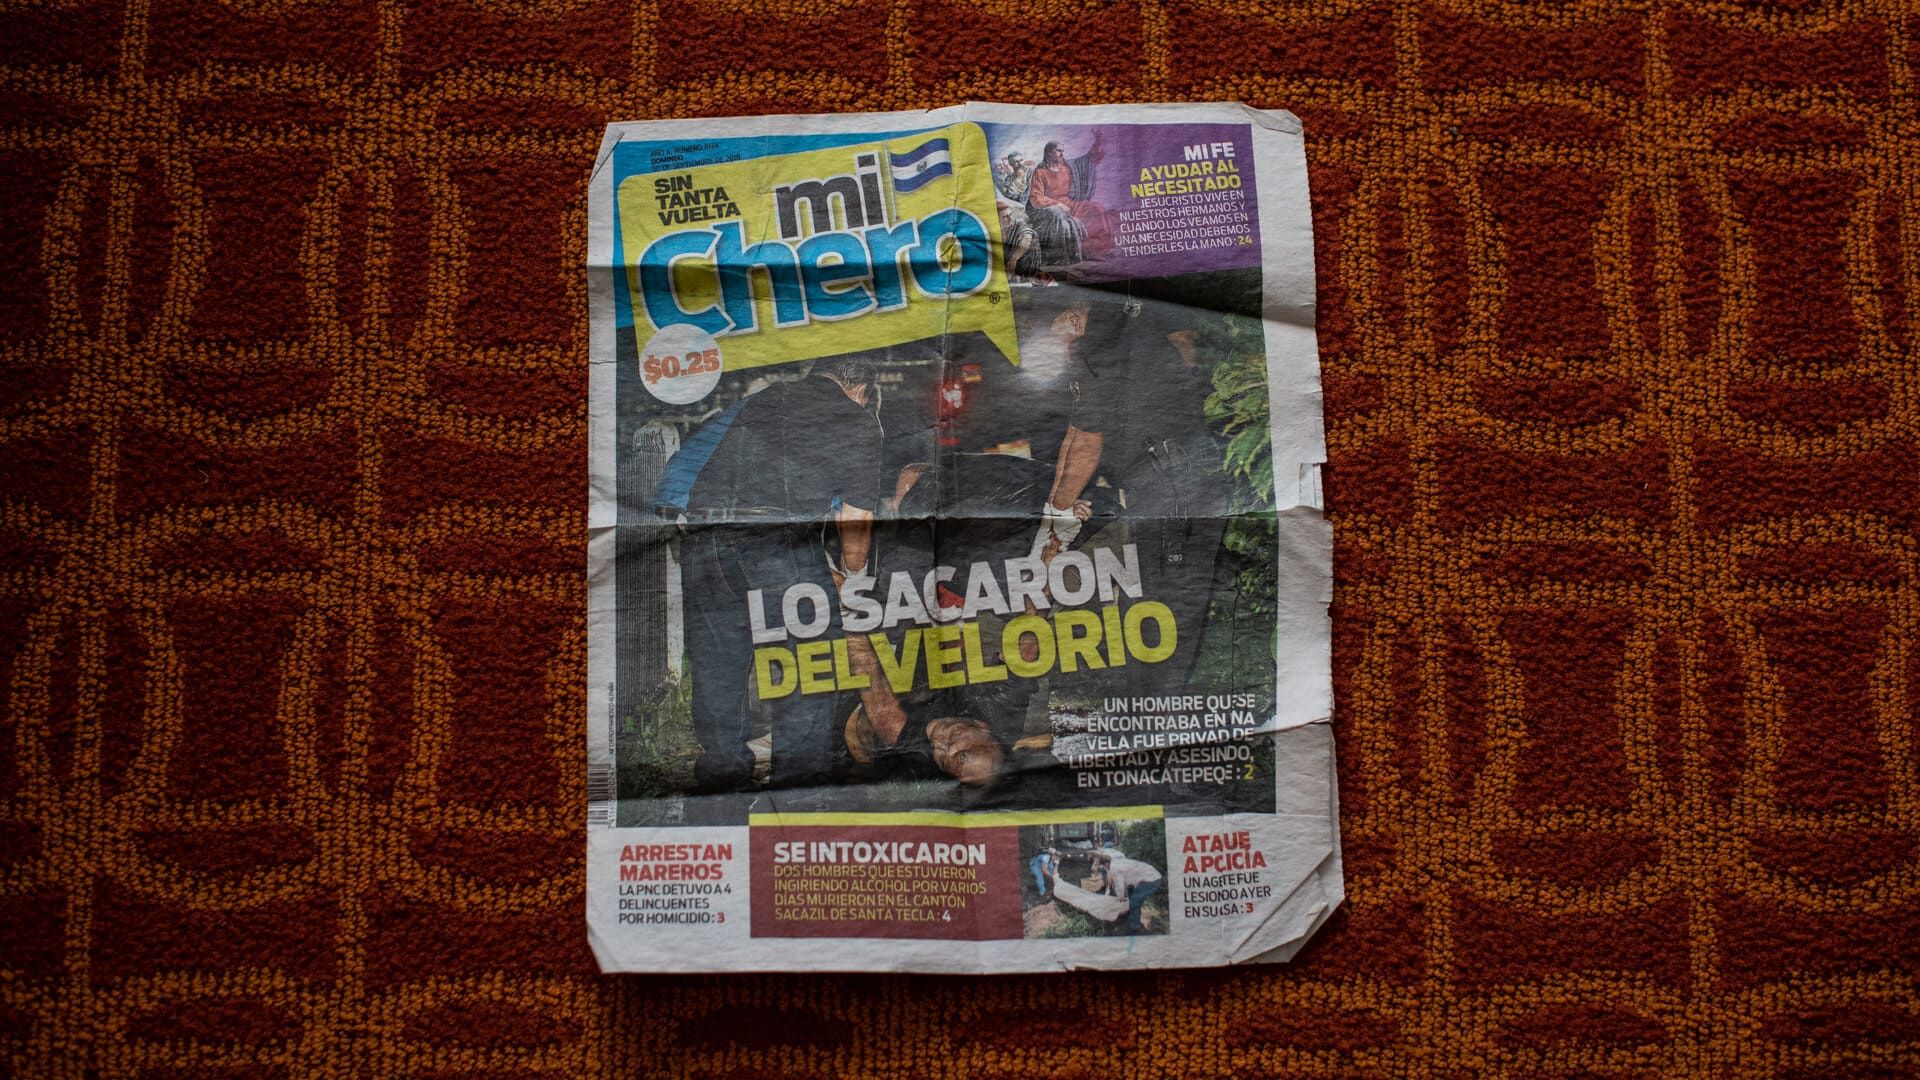 Newspapers across San Salvador featured the news of María's boyfriend’s murder in September 2018. In the Central American country, the gangs ensure that nobody reports what they see or hear. So although there were witnesses, newspapers told the same story: that he was killed at a wake, due to unknown motives. Image by Almudena Toral. El Salvador, 2018.